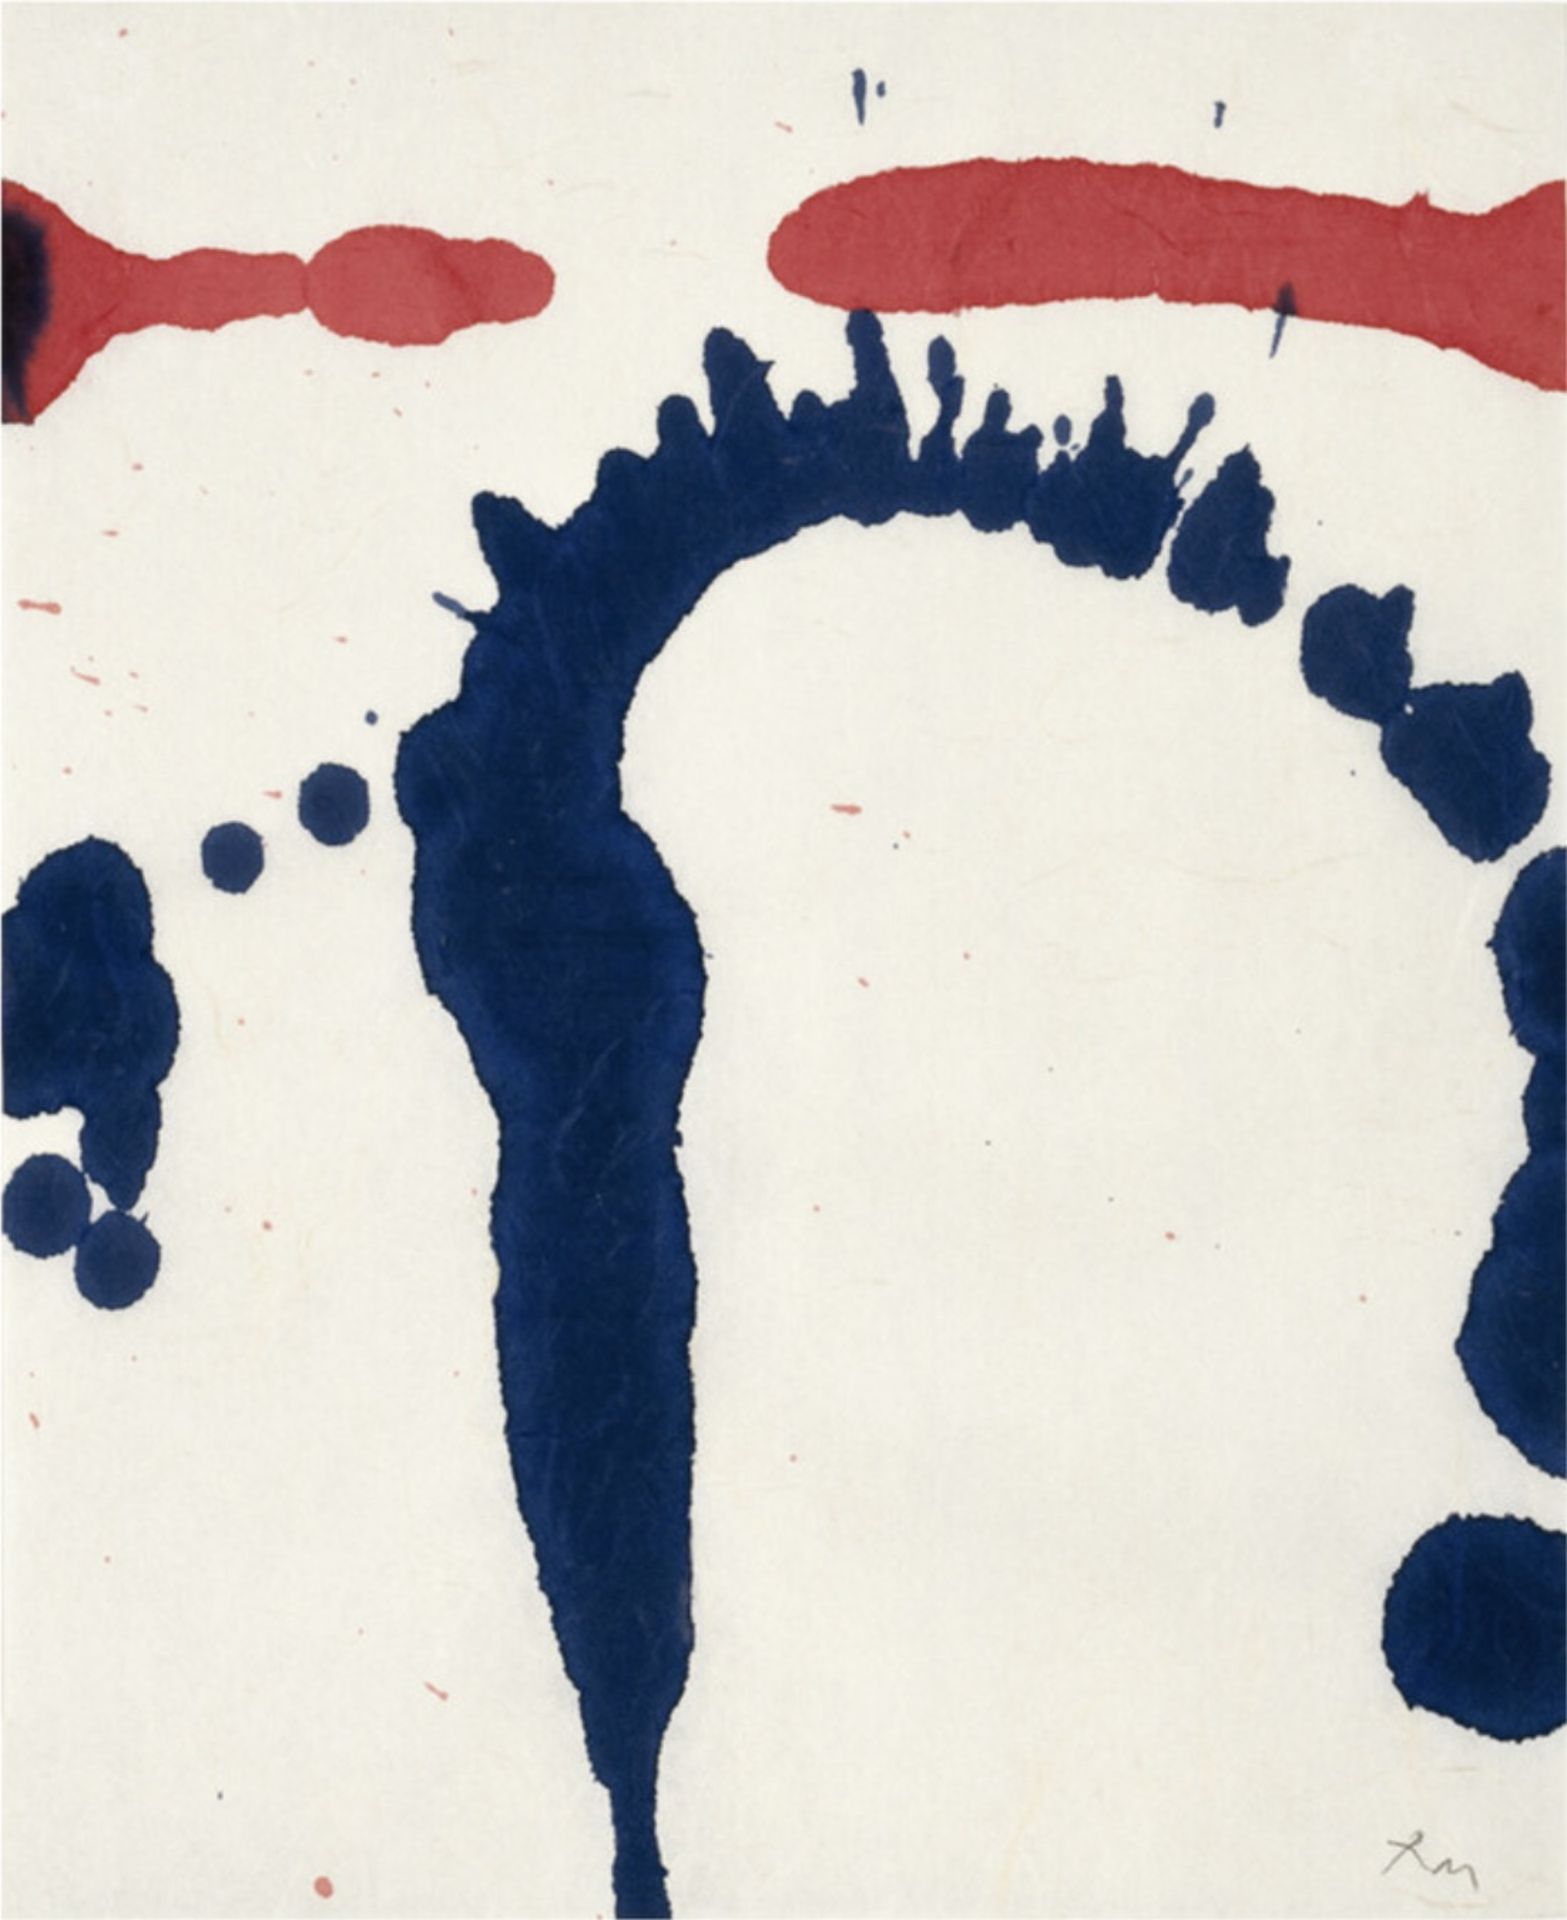 Robert Motherwell "Red and Blue, 1965" Print